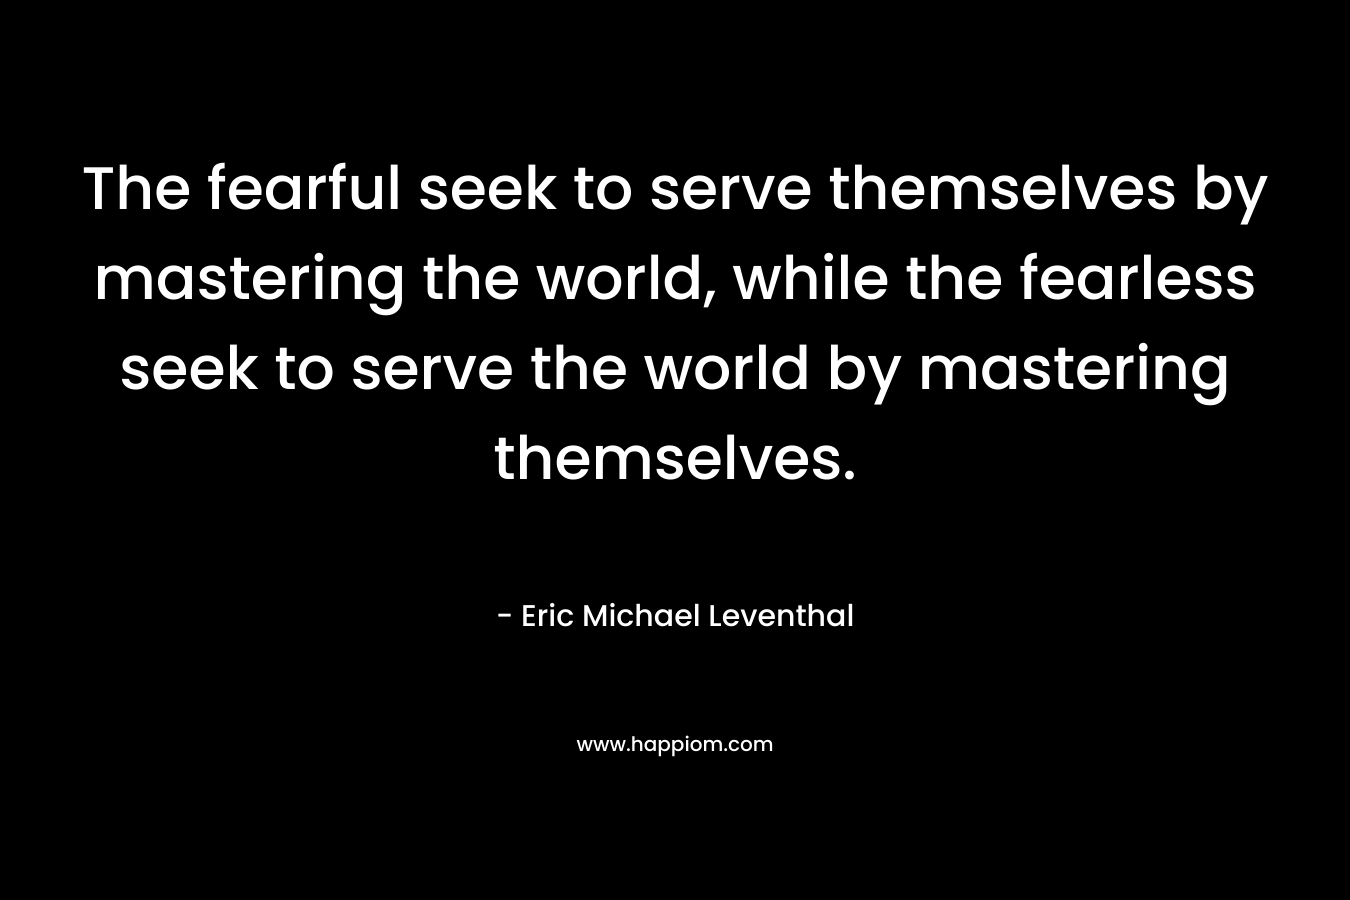 The fearful seek to serve themselves by mastering the world, while the fearless seek to serve the world by mastering themselves.